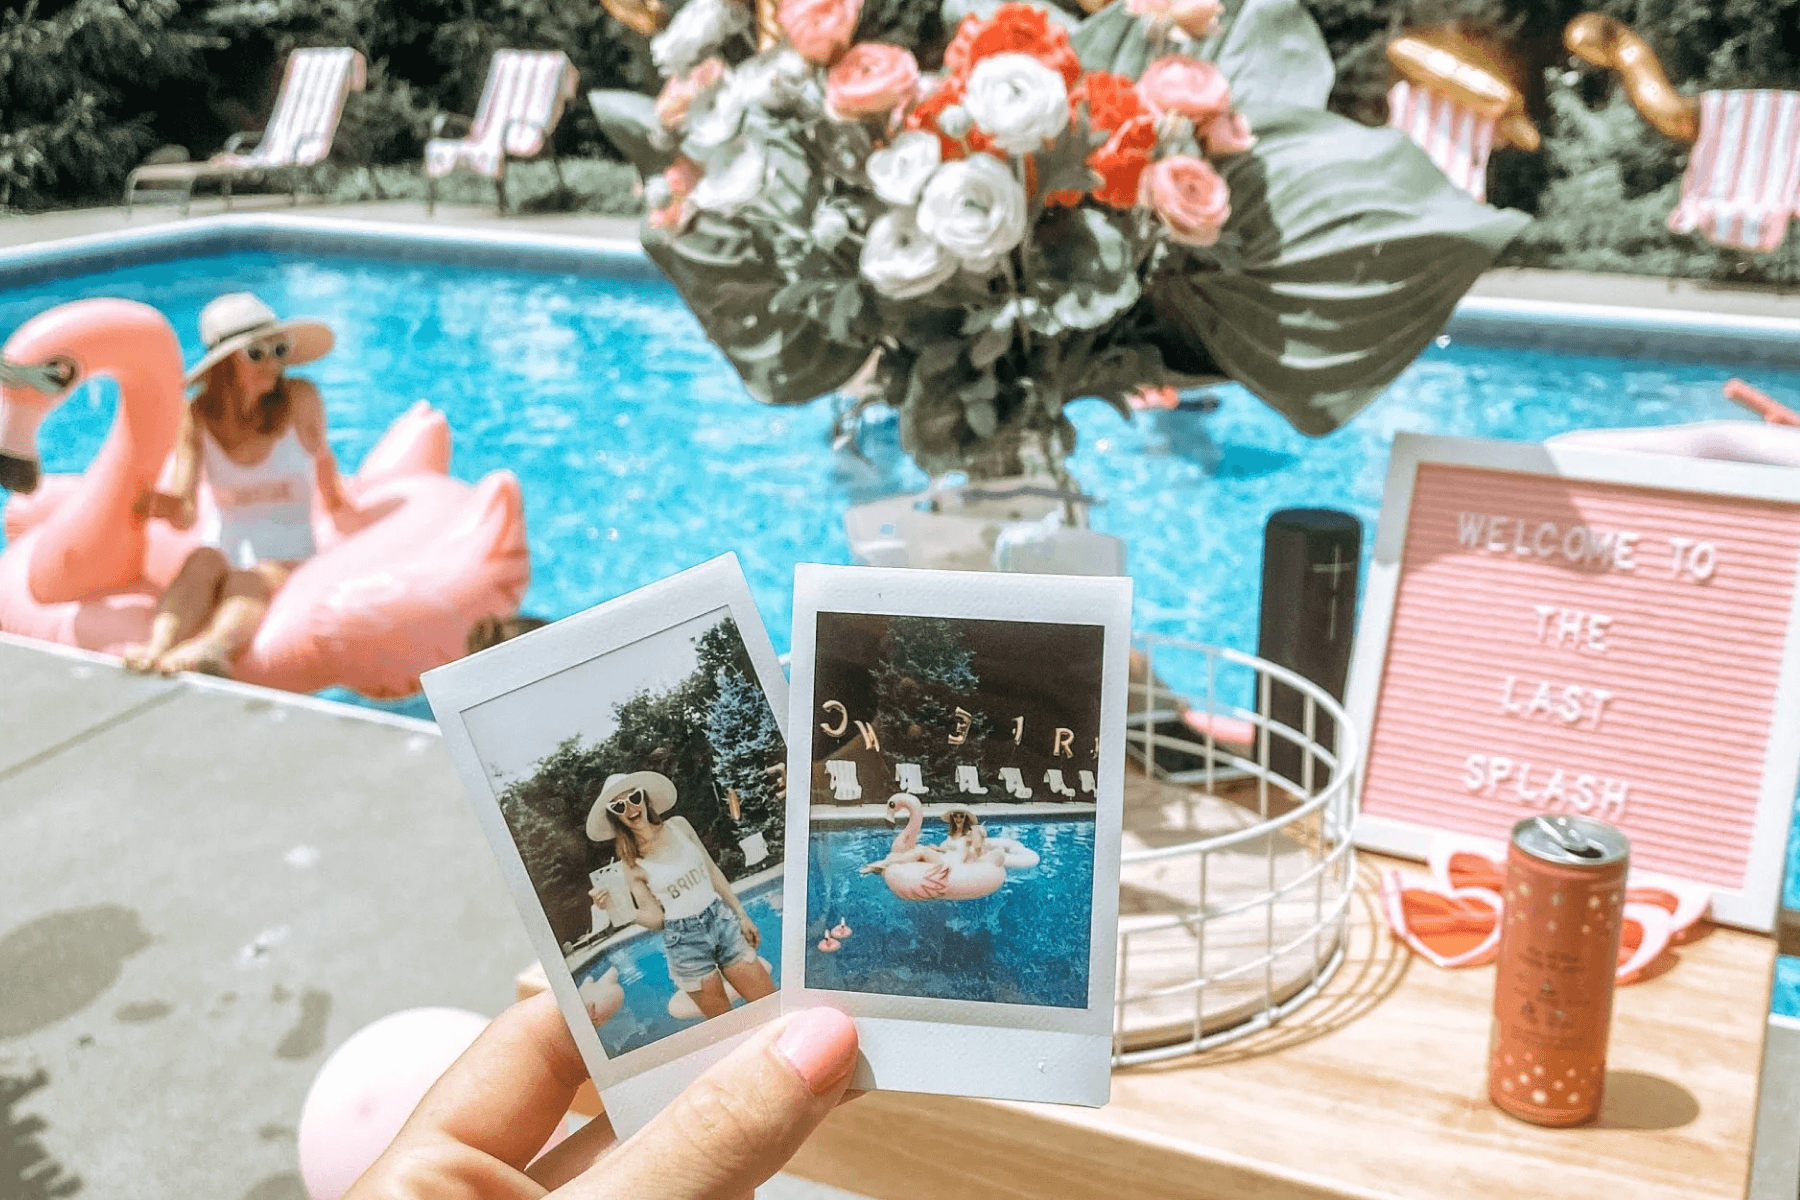 A hand holds up two Instax instant photos of women enjoying a pool day in front of an actual pool with flowers and someone on a pink flamingo float.